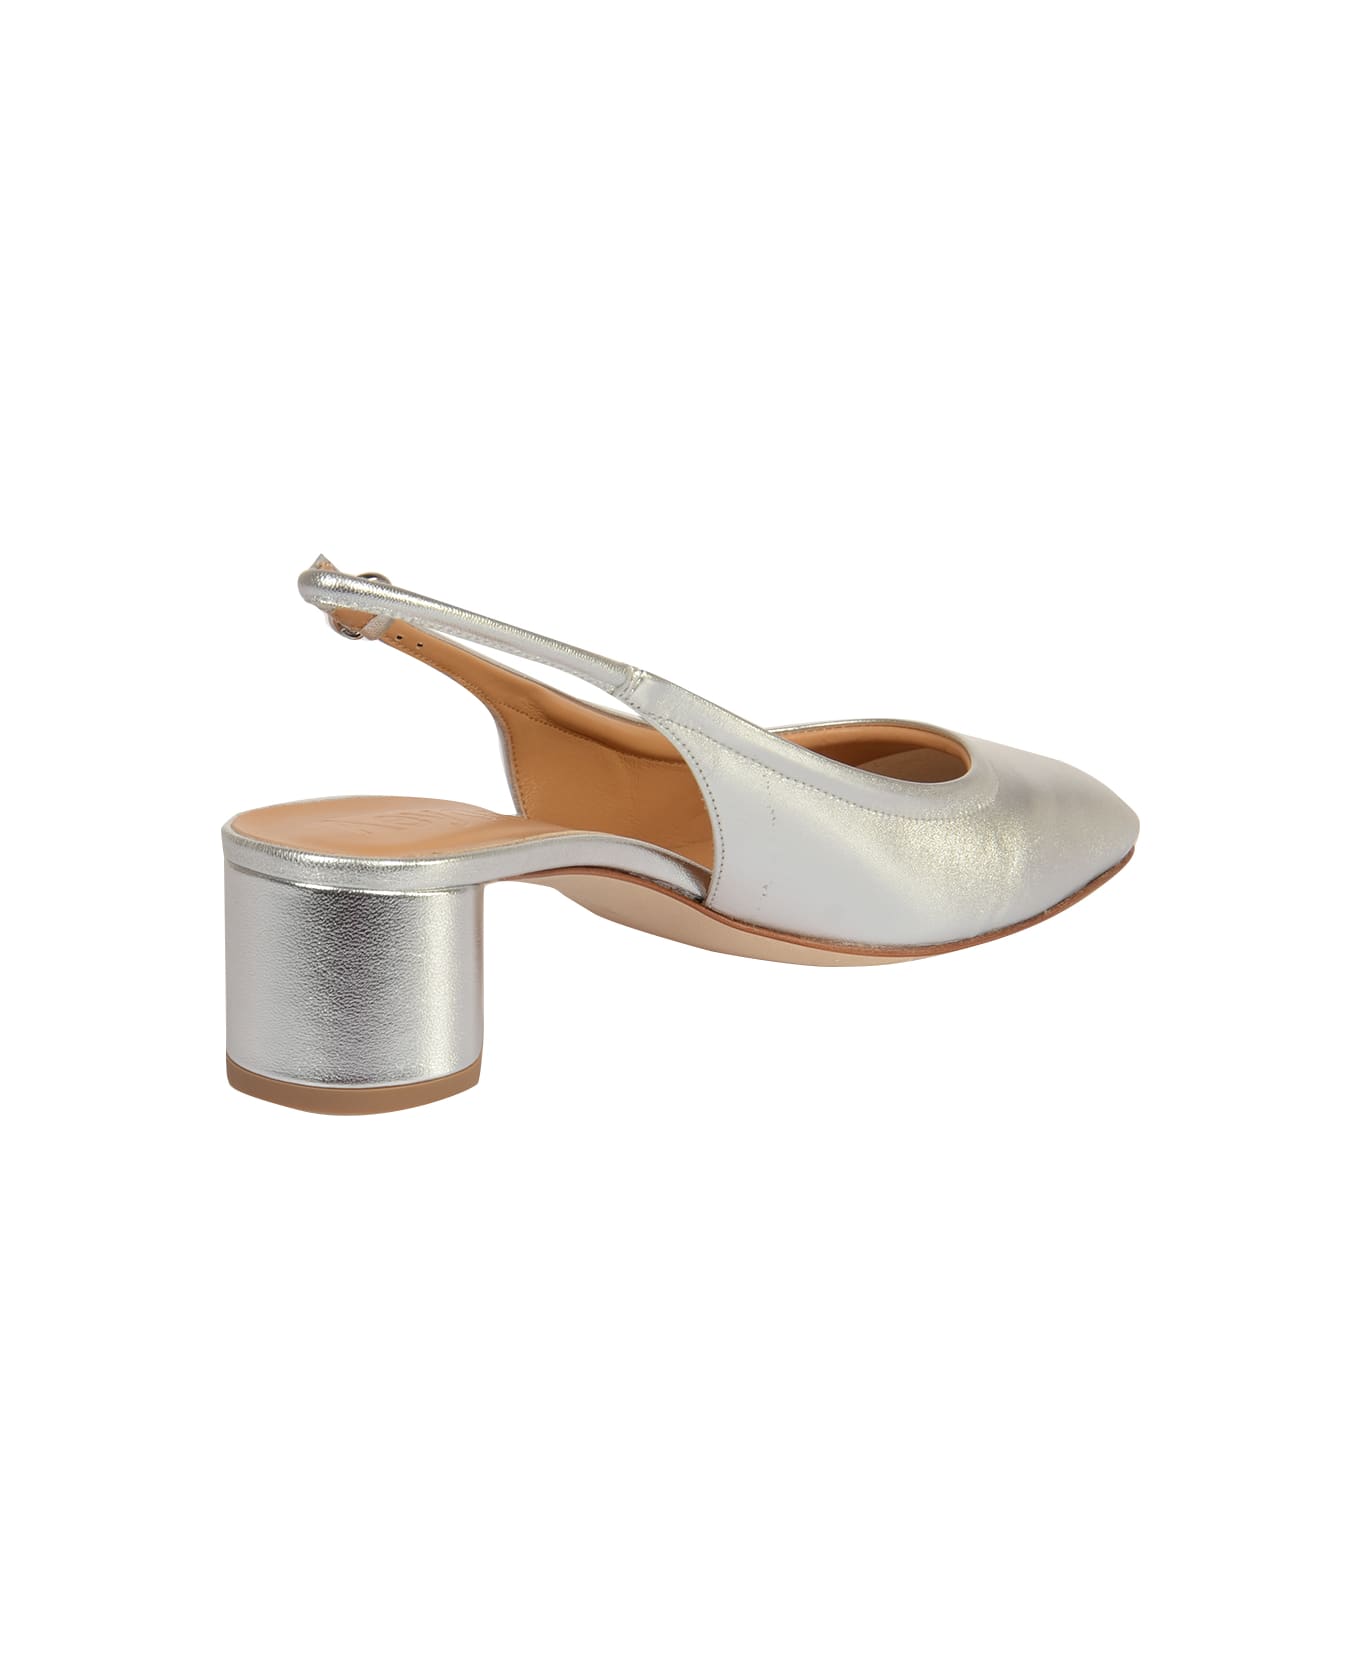 aeyde Romy Laminated Sandals - Silver ハイヒール